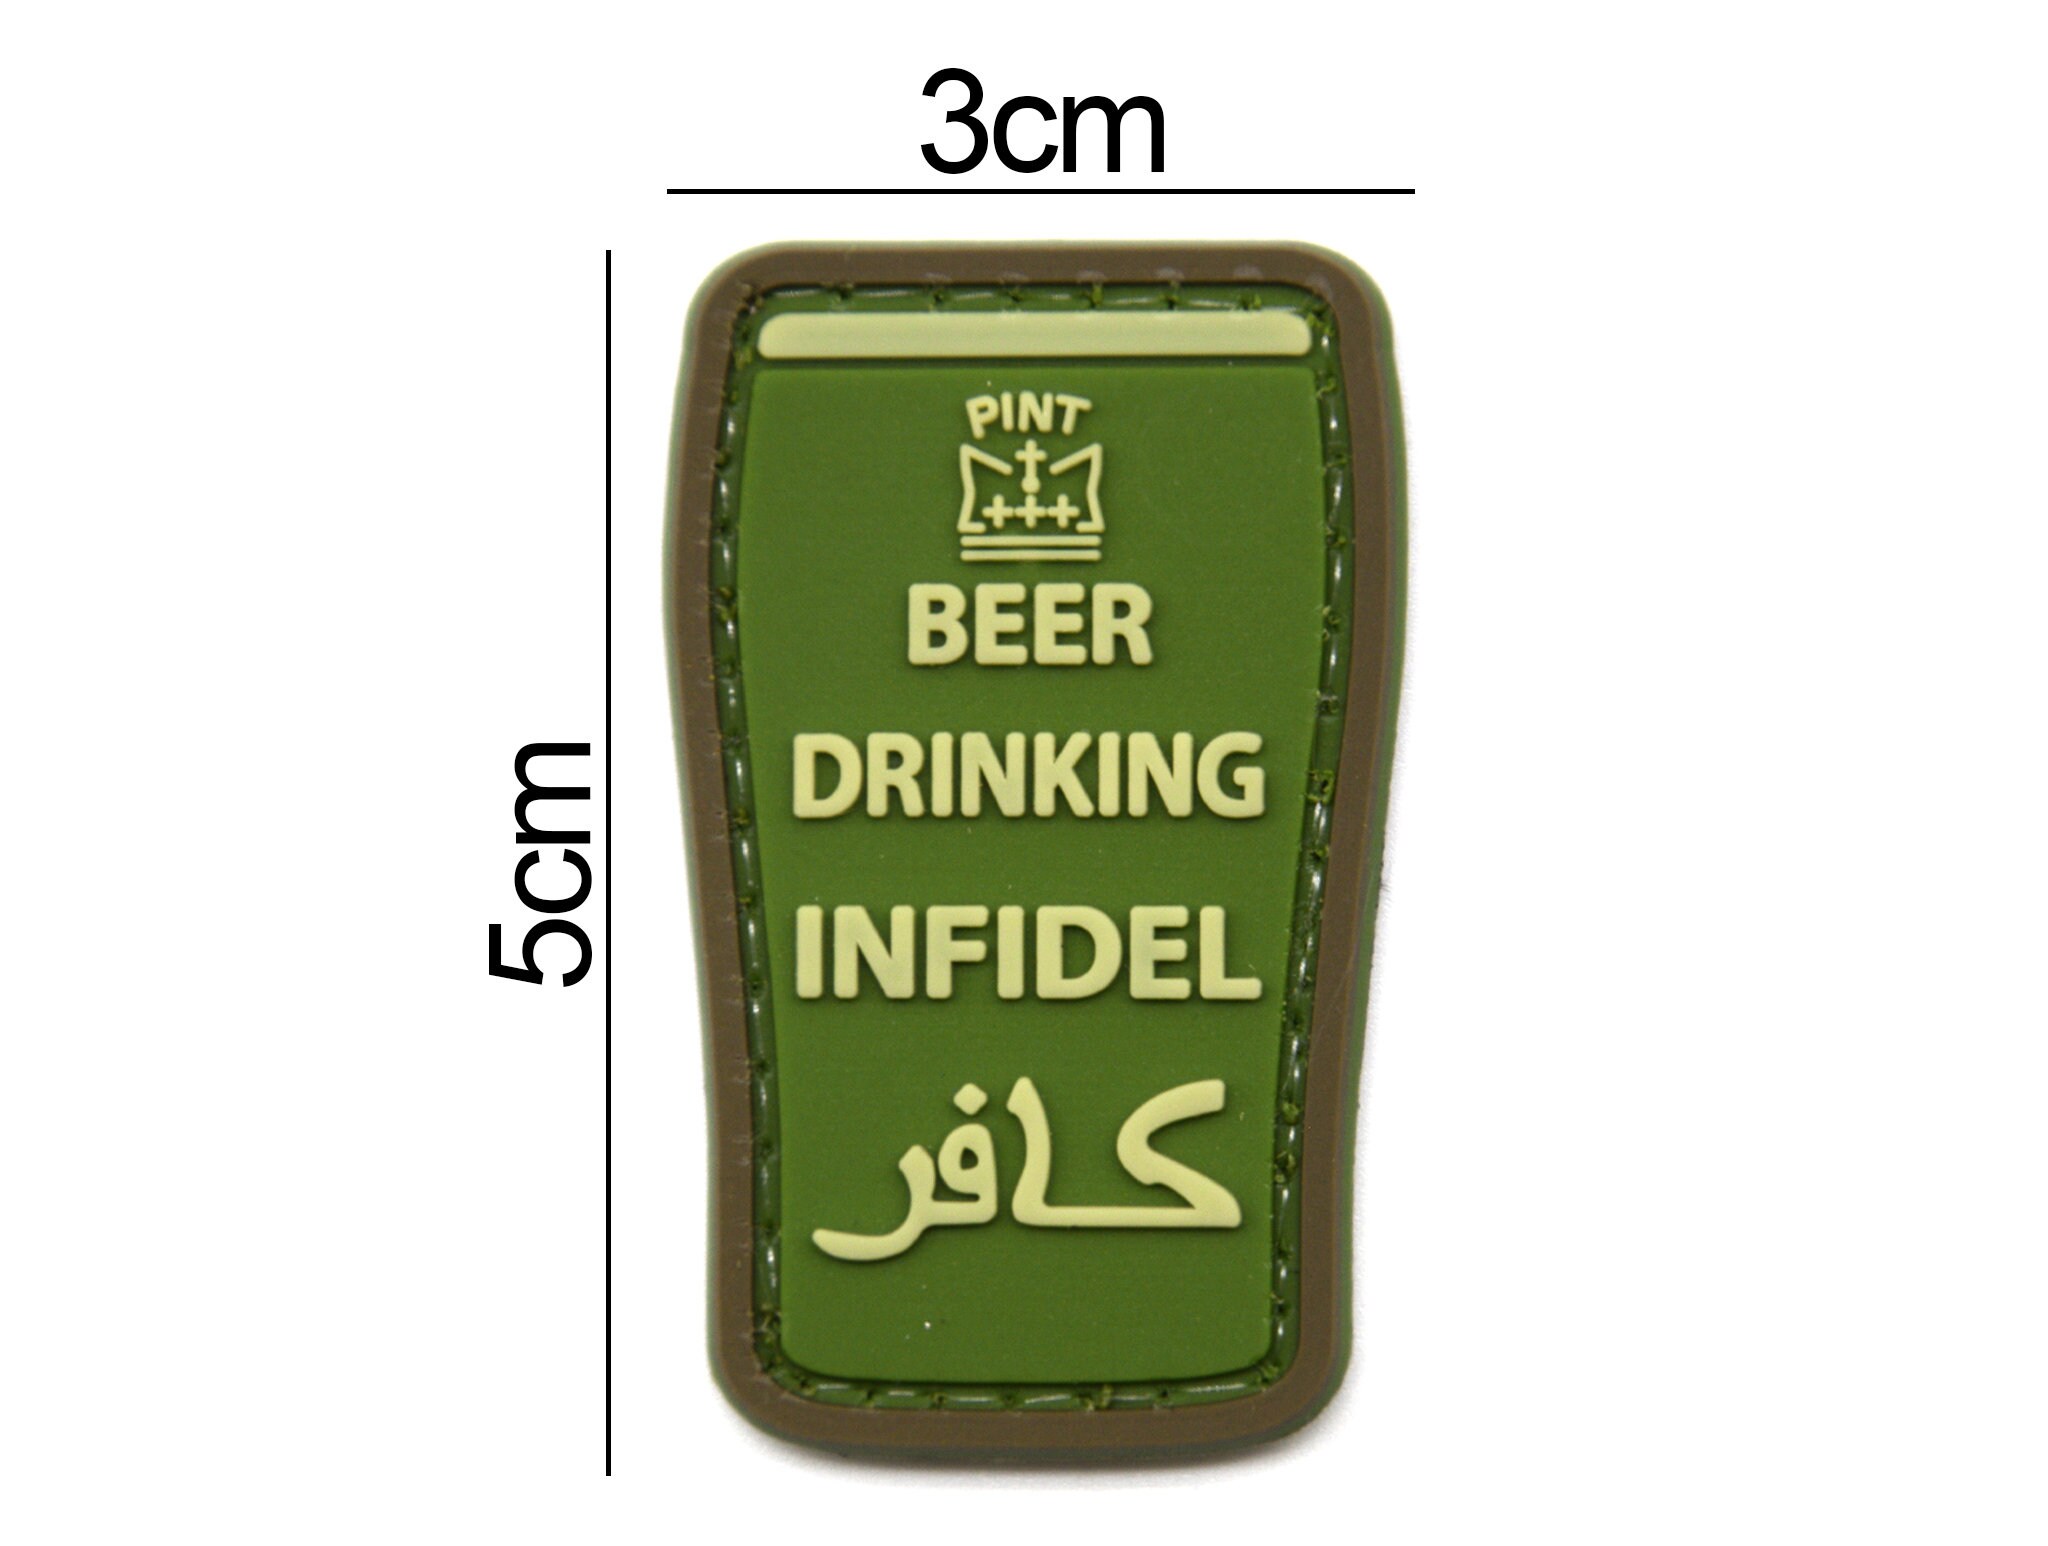 TACTICAL MORALE PVC PATCH PINT SHAPED BEER DRINKING INFIDEL ID BADGE CLEARANCE 